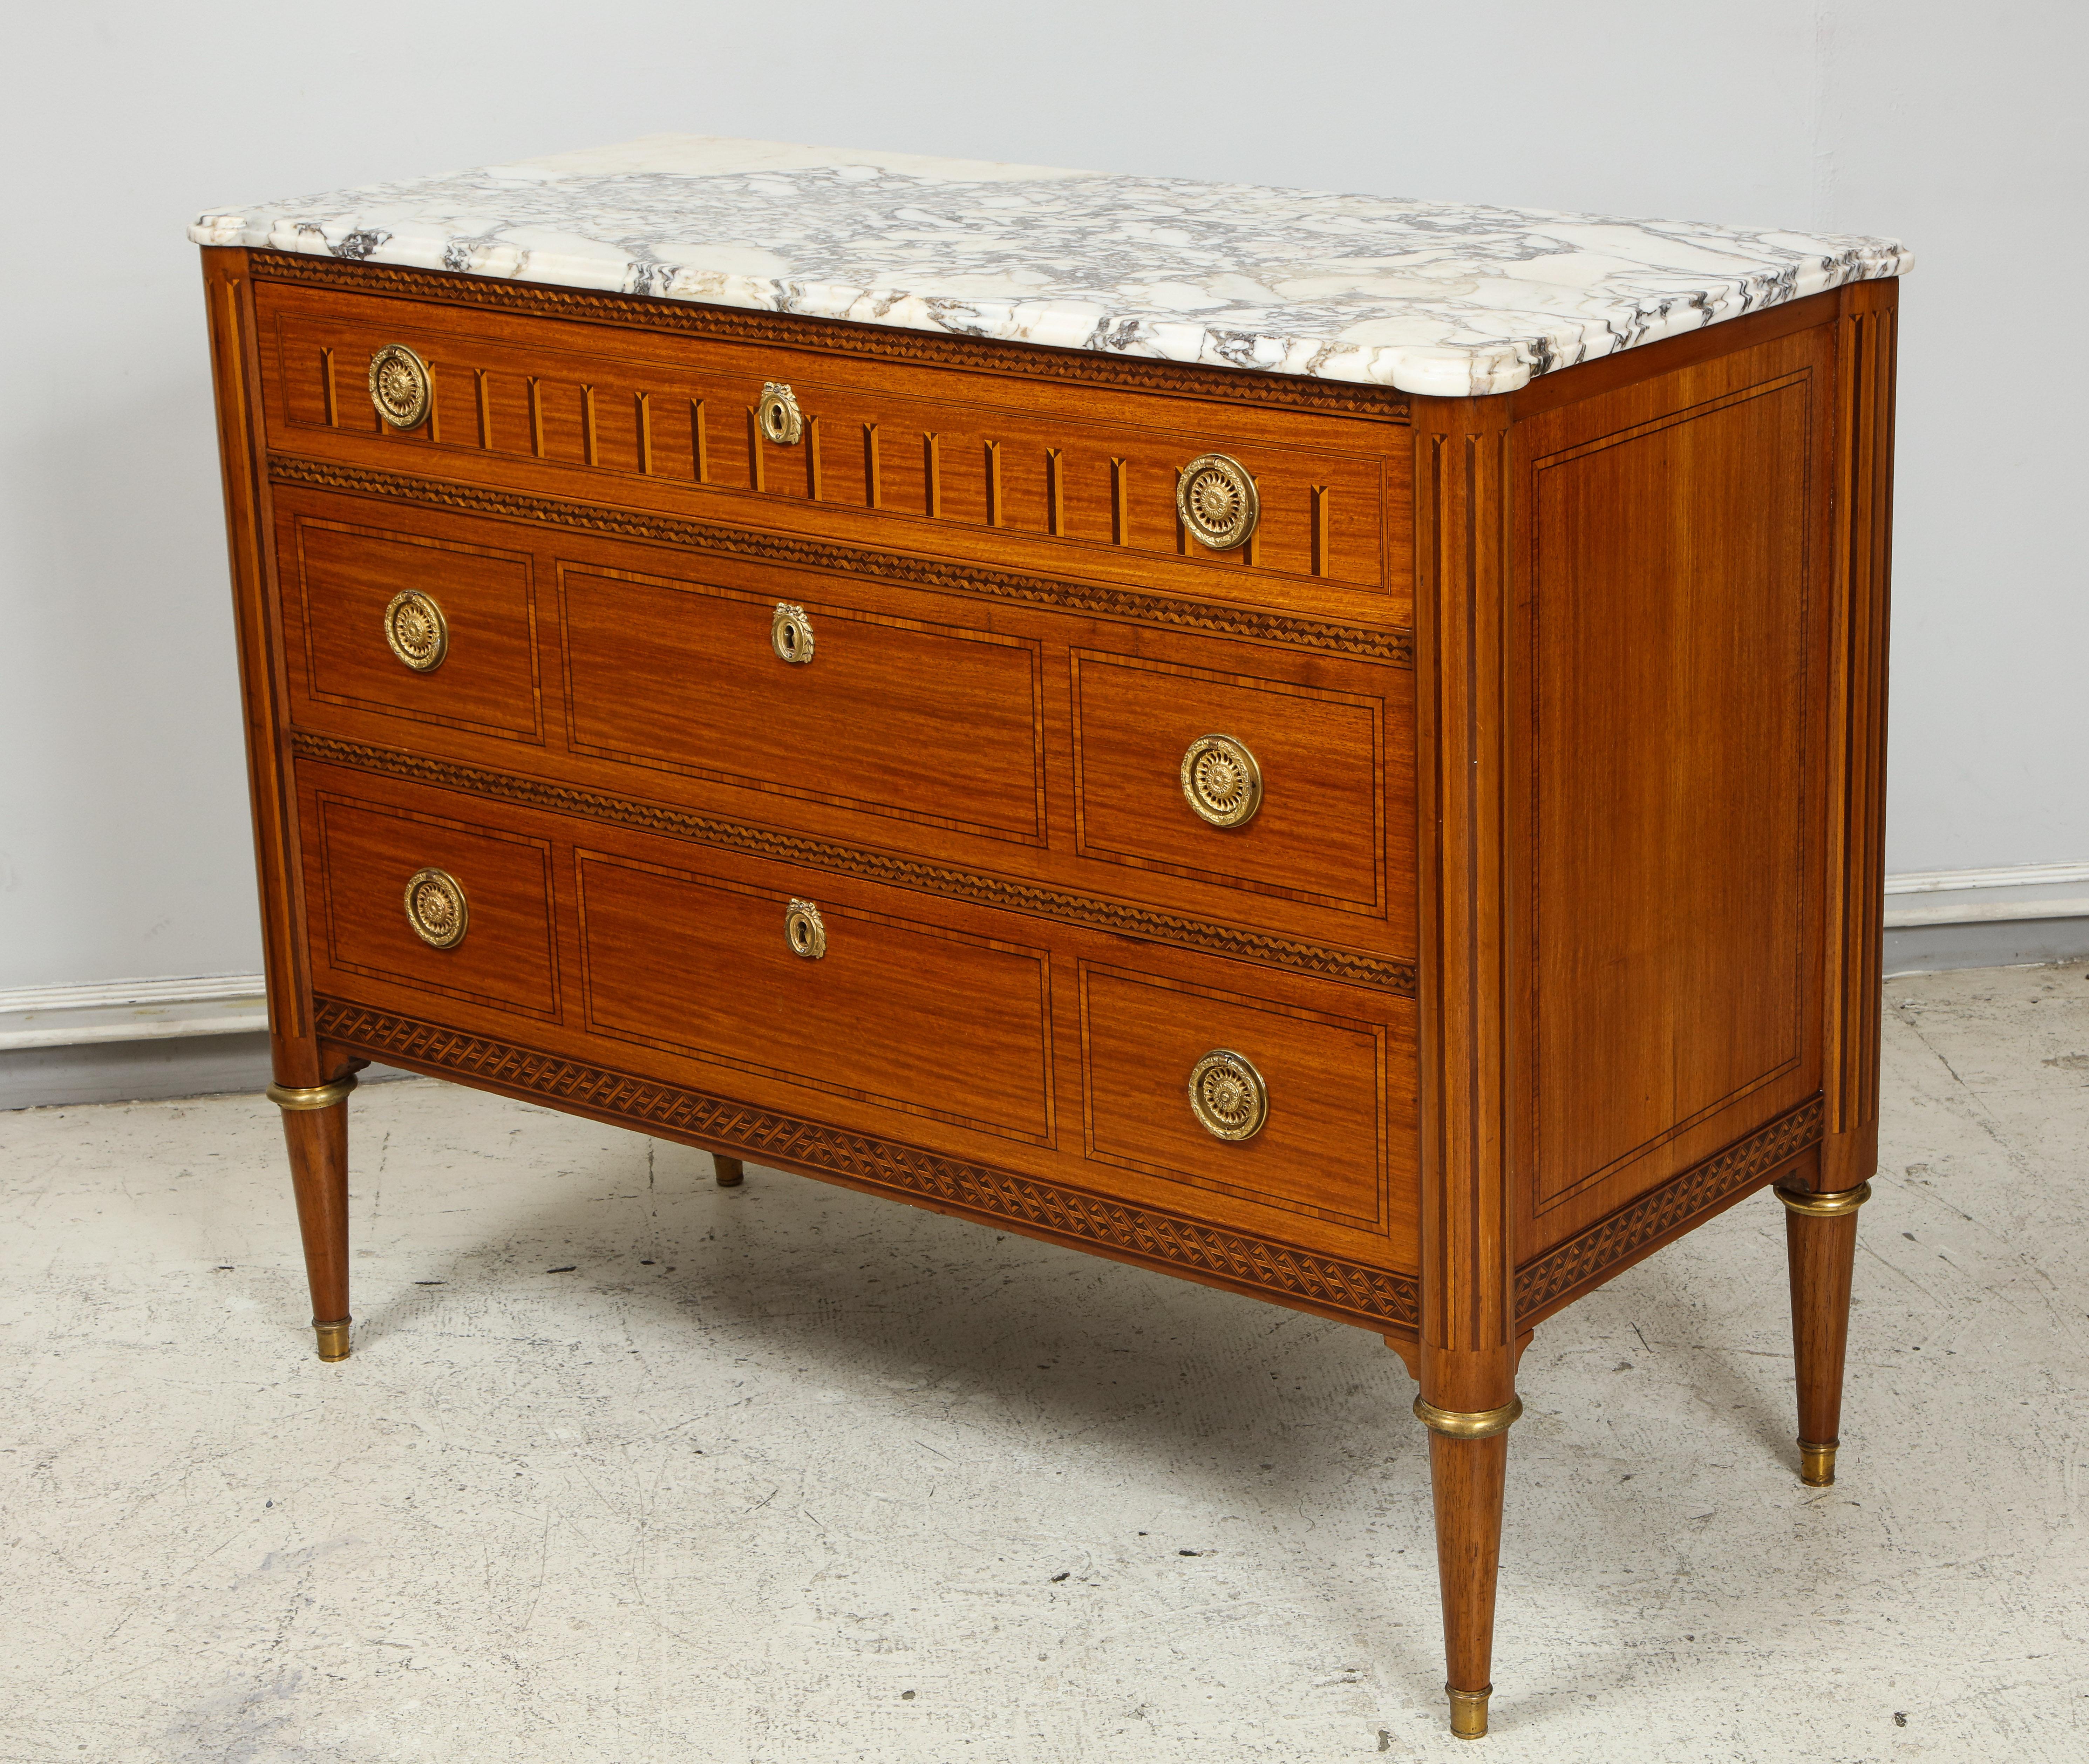 Antique Louis XVI style parquetry marble-top commode
Beautifully Inlaid in walnut, ebony, mahogany, olive wood.